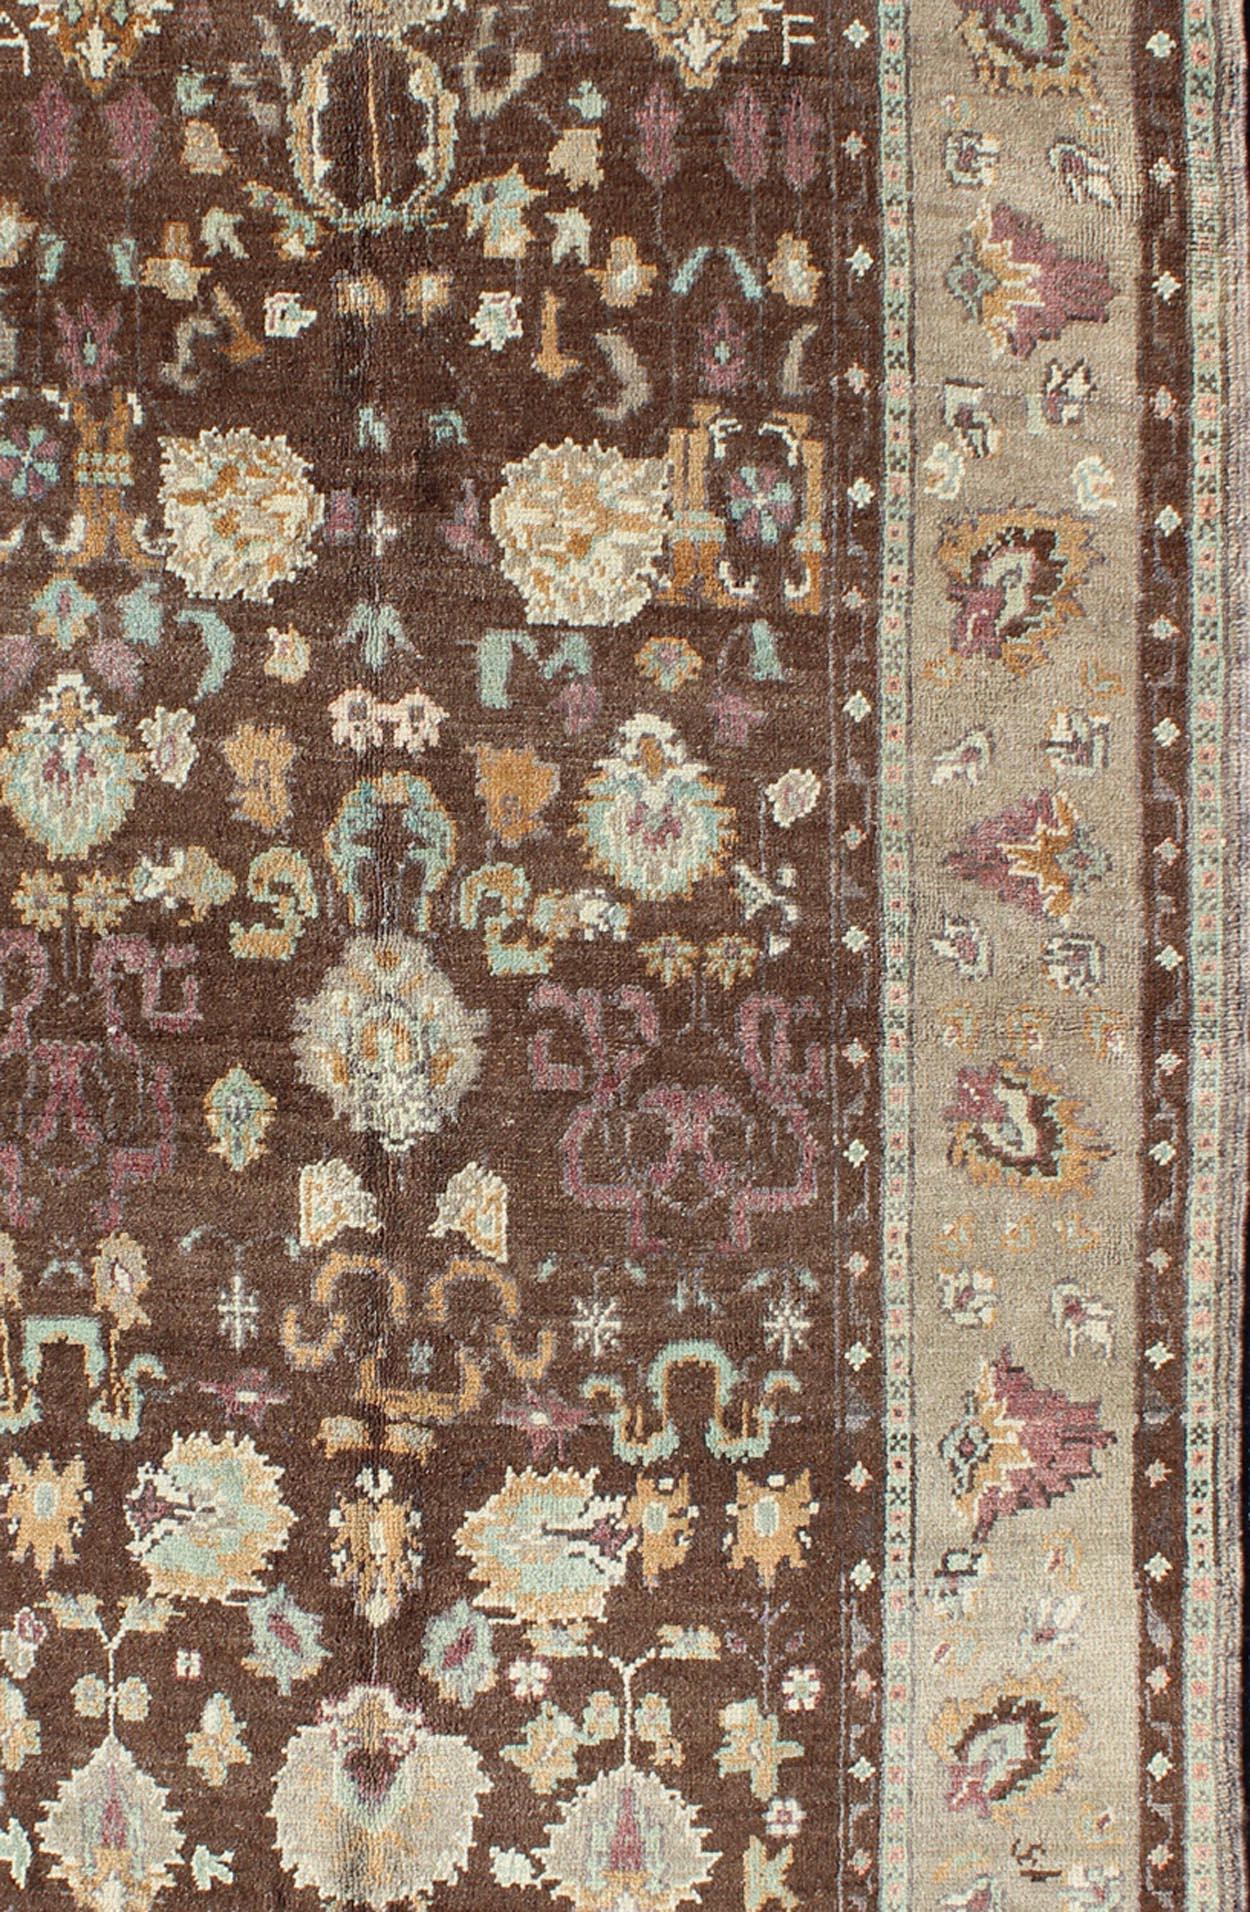 Measures: 4'5 x 8'3

This Turkish Oushak is set on a chocolate-brown background and features a light gray/taupe border. The overall palette remains cool, with accent colors of ice blue, shades of taupe-gray, creamy orange, burgundy and hints of